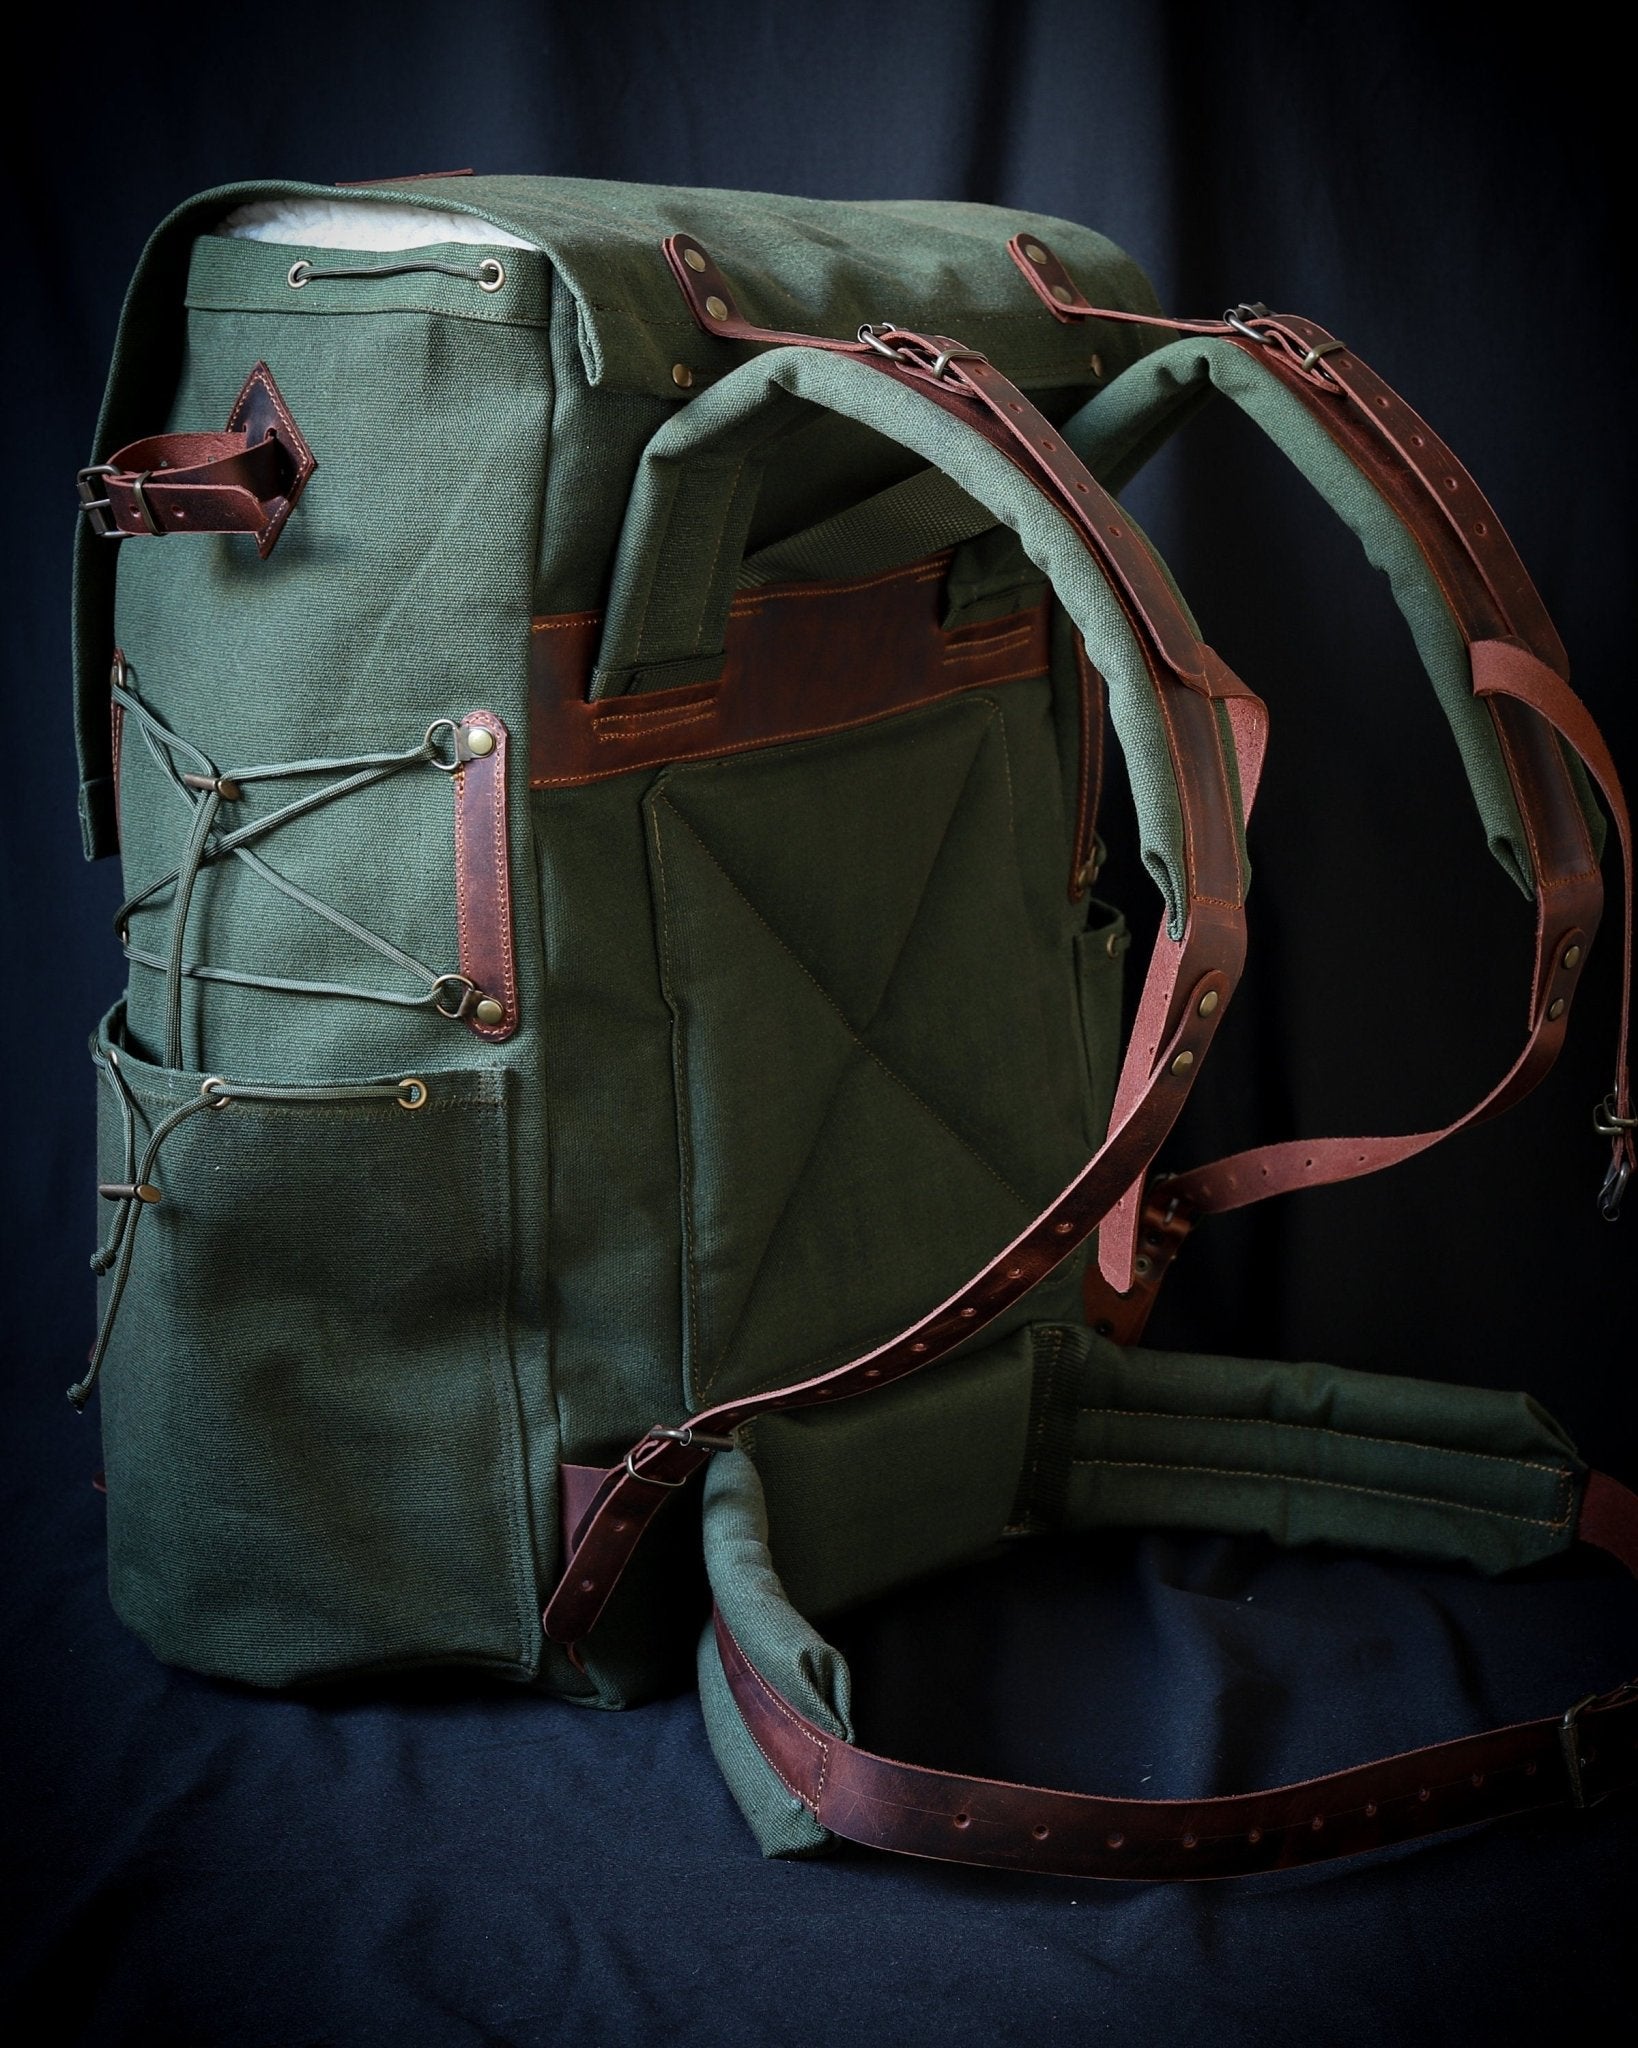 50L | 3 Pieces Left | Green, Brown, Dhaki Colours | Handmade Leather, Waxed Canvas Backpack for Travel, Camping, Bushcraft | Personalization bushcraft - camping - hiking backpack 99percenthandmade Khaki Green 30 Liters 